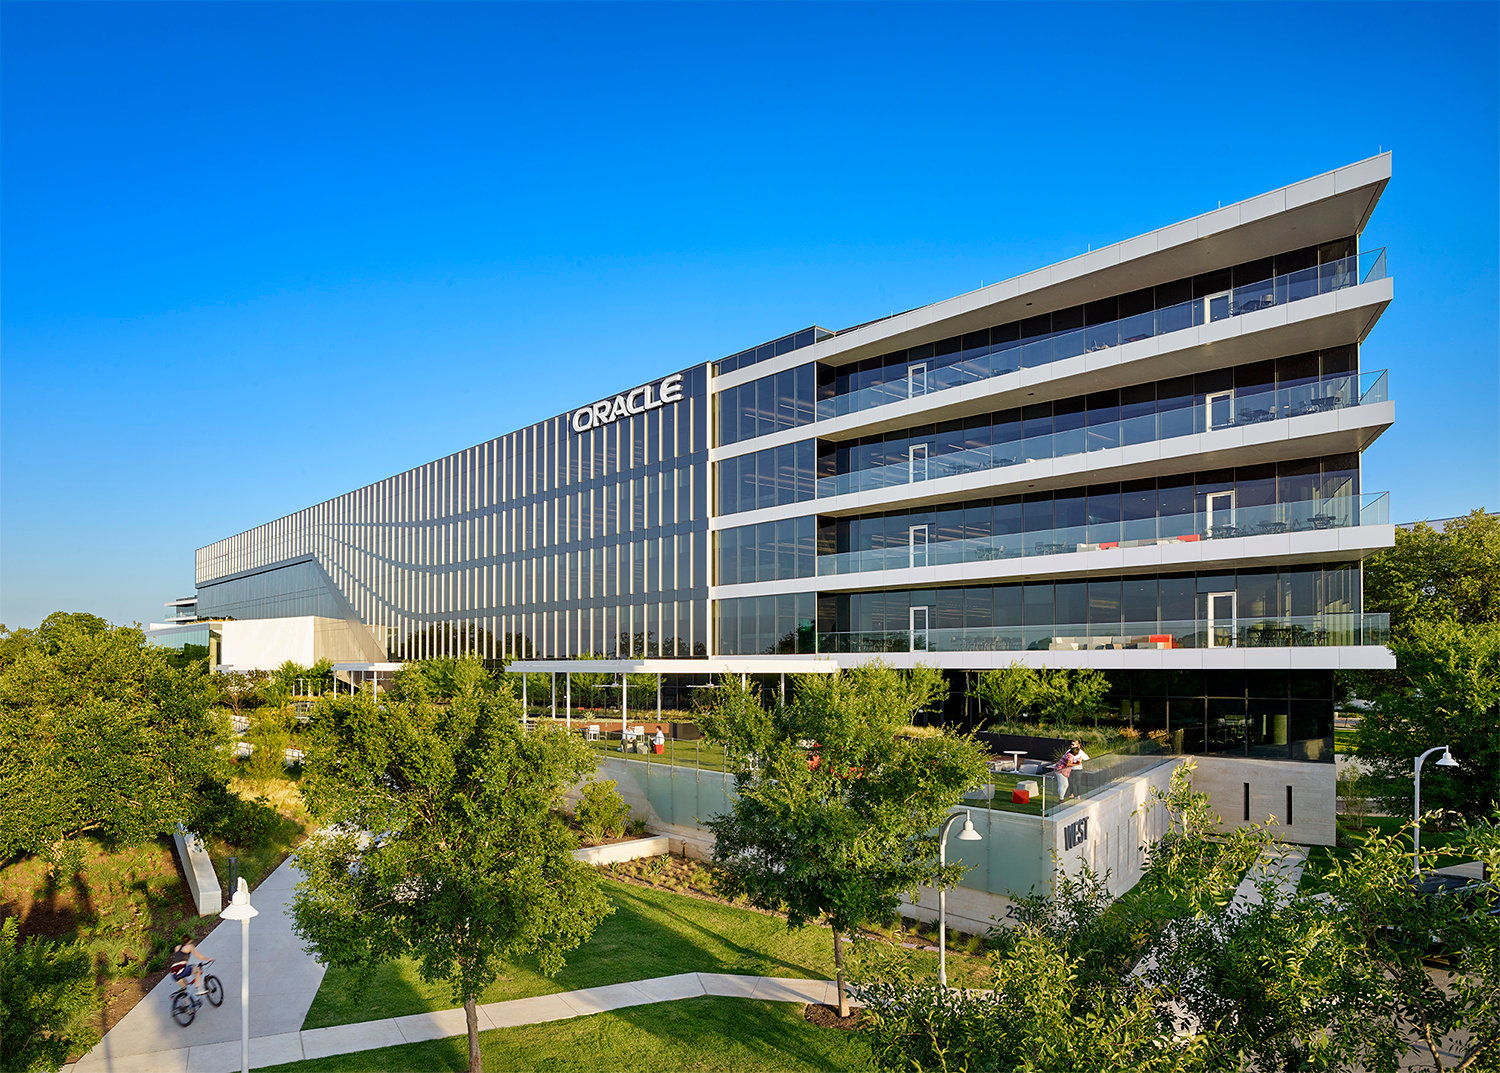 Software company Oracles Austin Texas headquarters